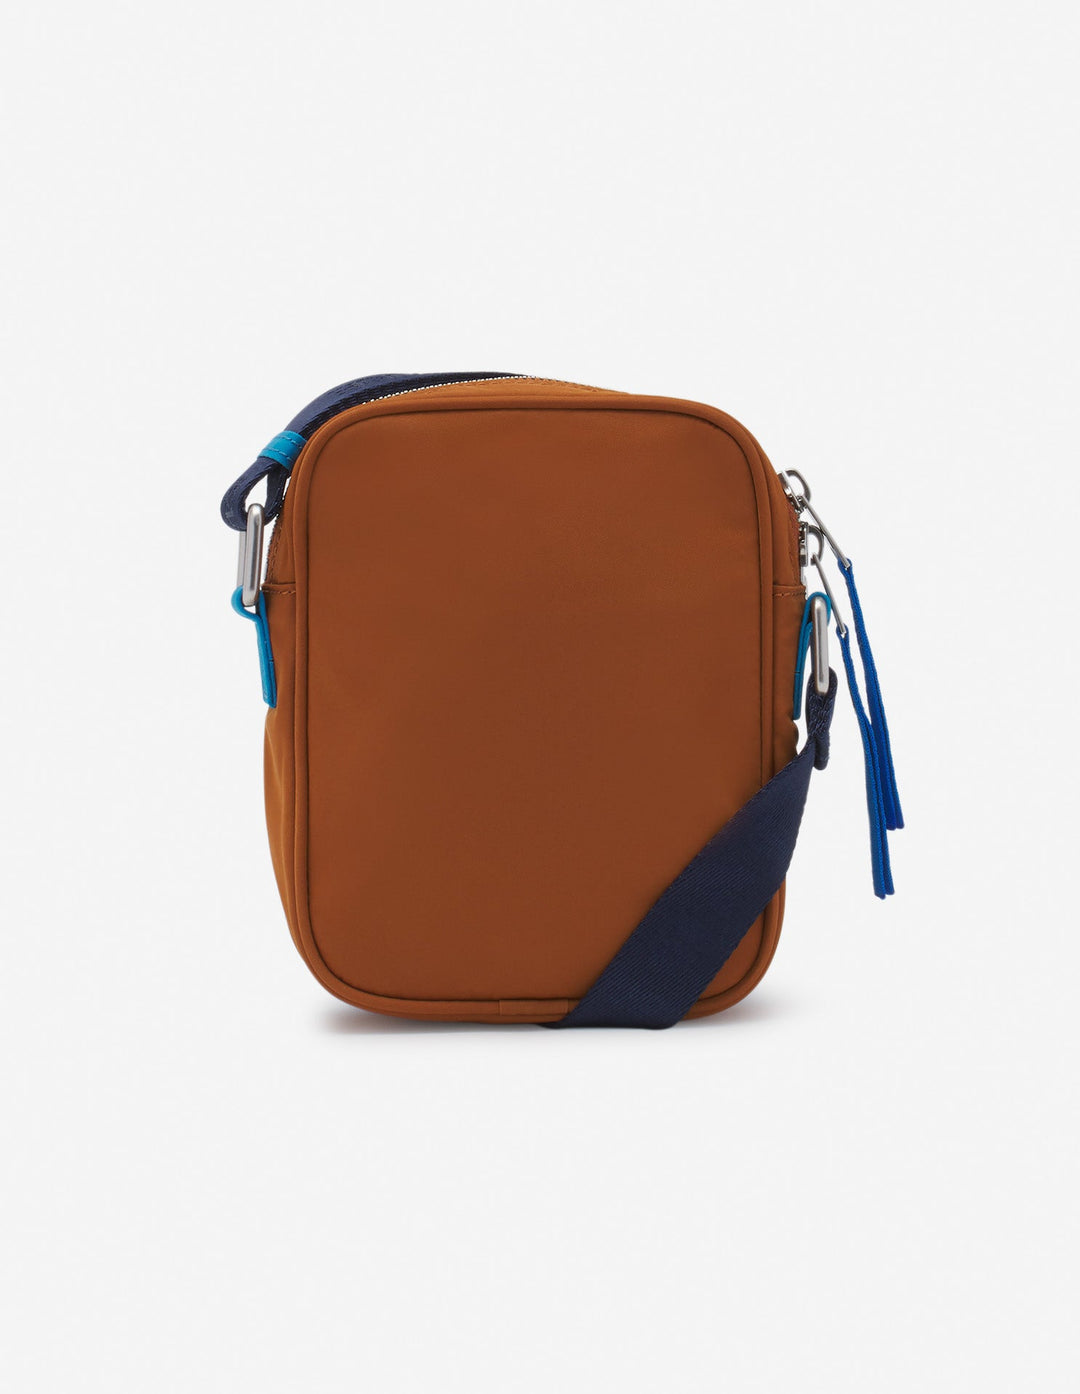 "THE TRAVELLER" CROSSBODY POUCH